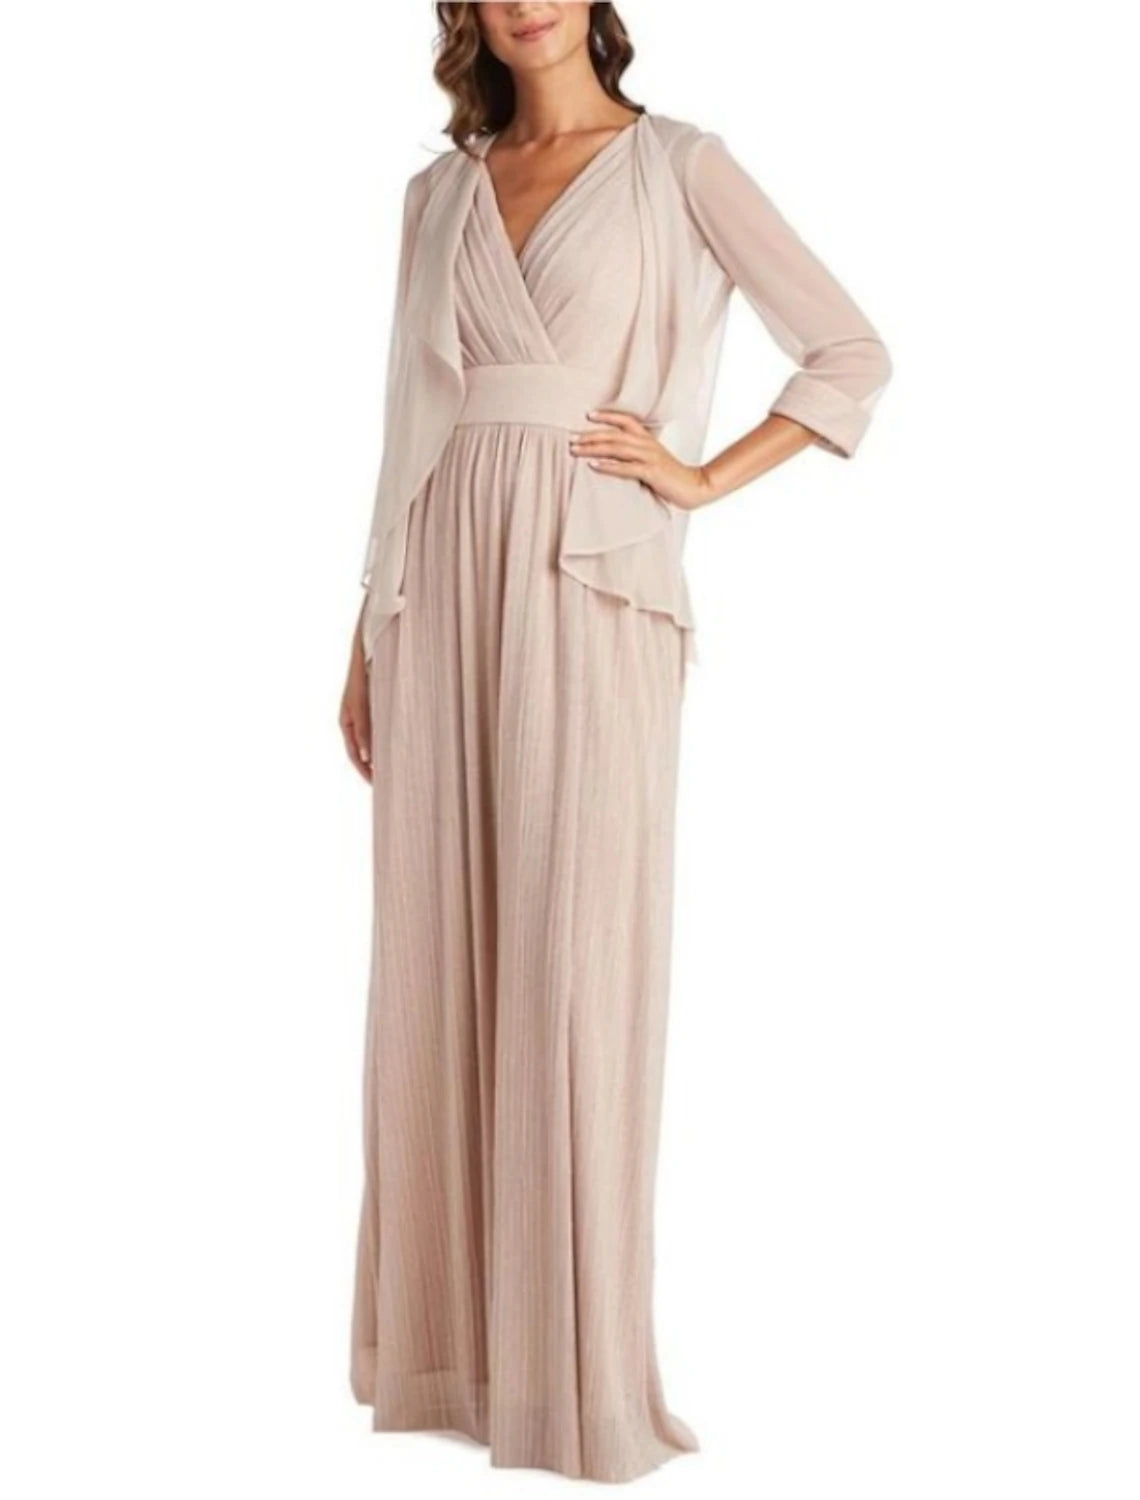 Two Piece Mother of the Bride Dress Simple Elegant V Neck Floor Length Chiffon 3/4 Length Sleeve with Pleats Solid Color